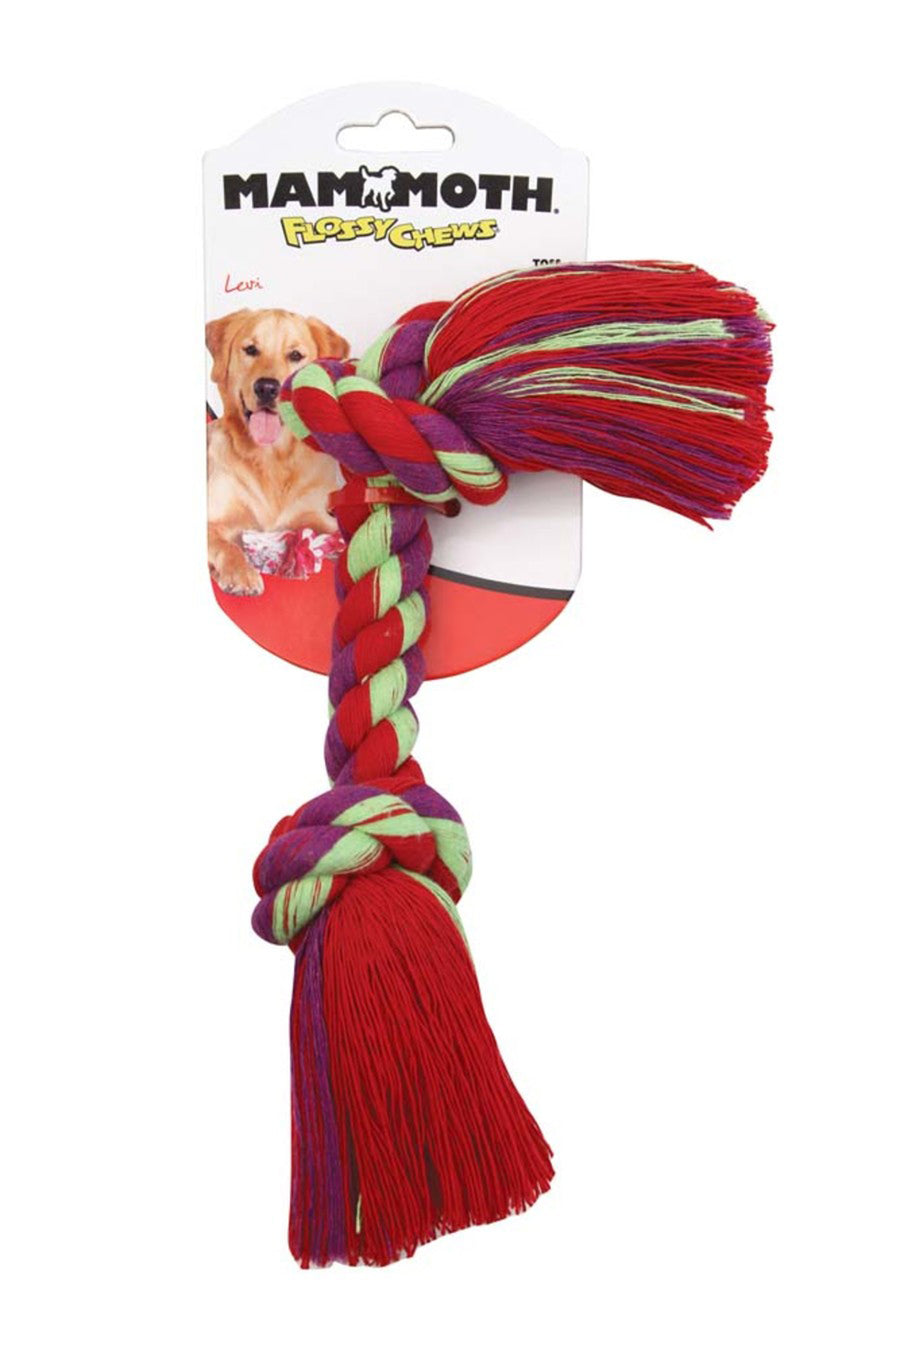 Mammoth Pet Products Cottonblend 2 Knot Rope Tug Toy 2 Knots Multi-Color 42 in